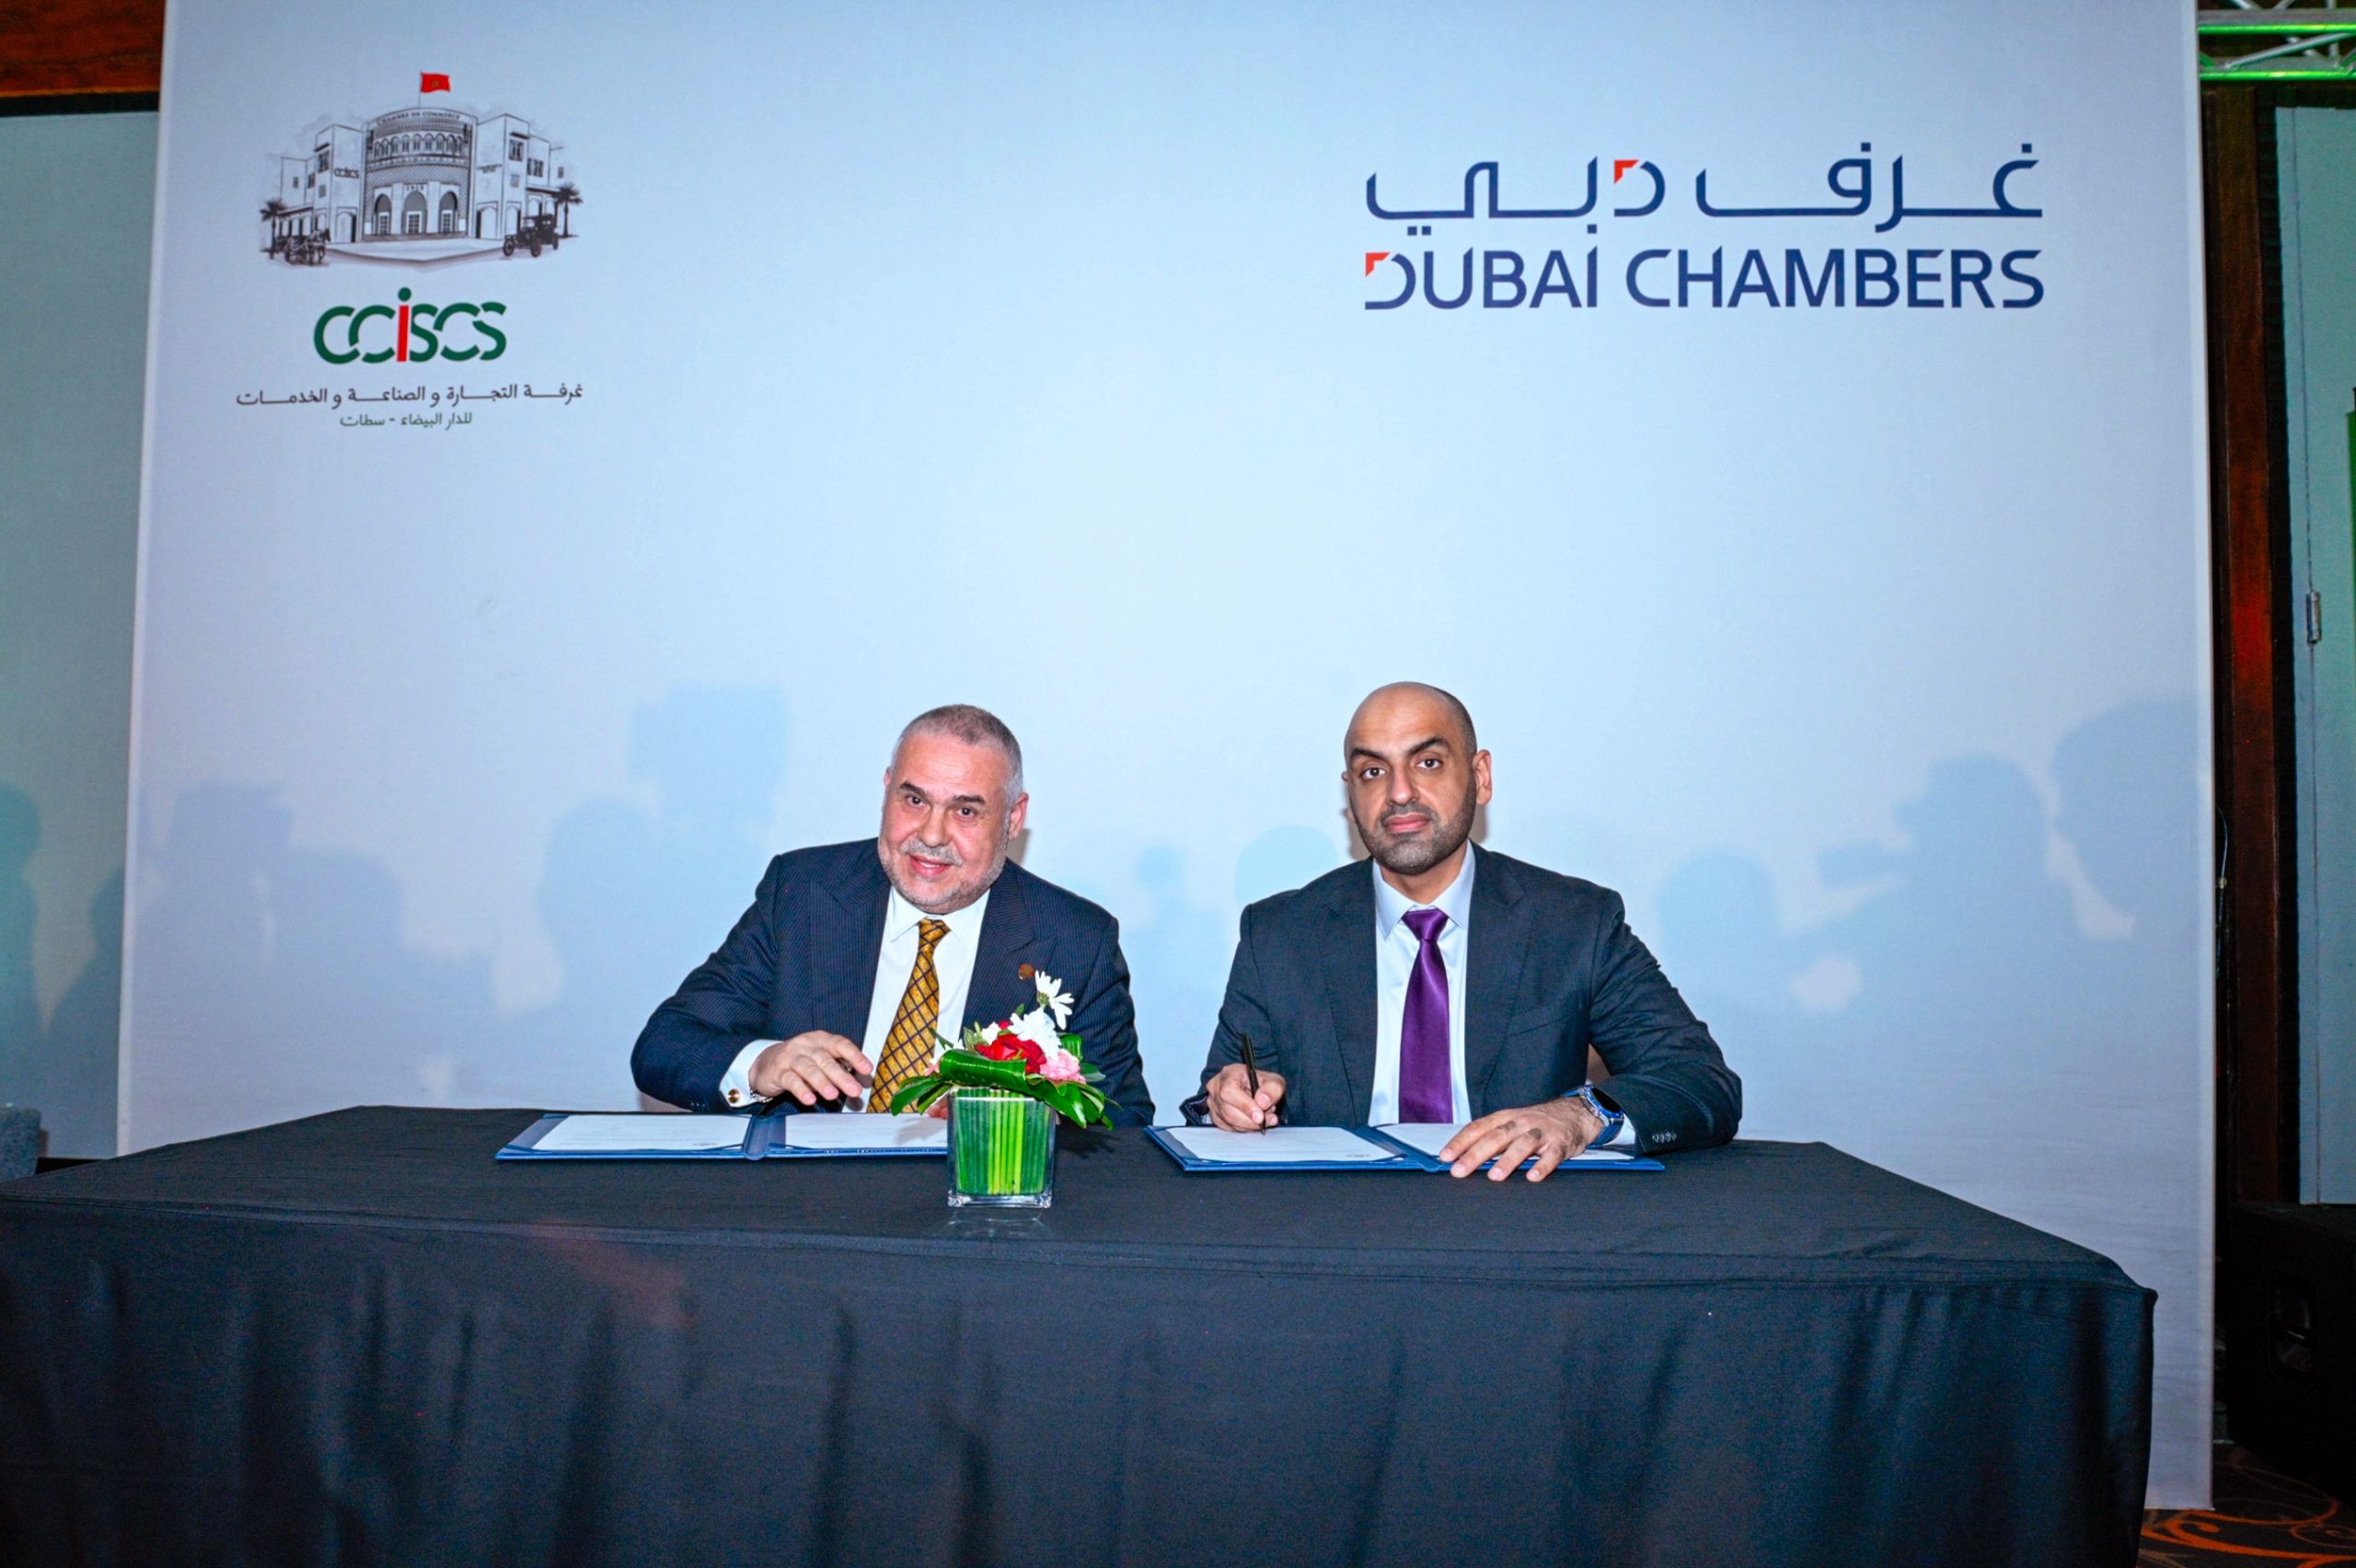 Dubai International Chamber trade mission concludes in Casablanca with 300 meetings to promote business opportunities between companies in Dubai and Morocco